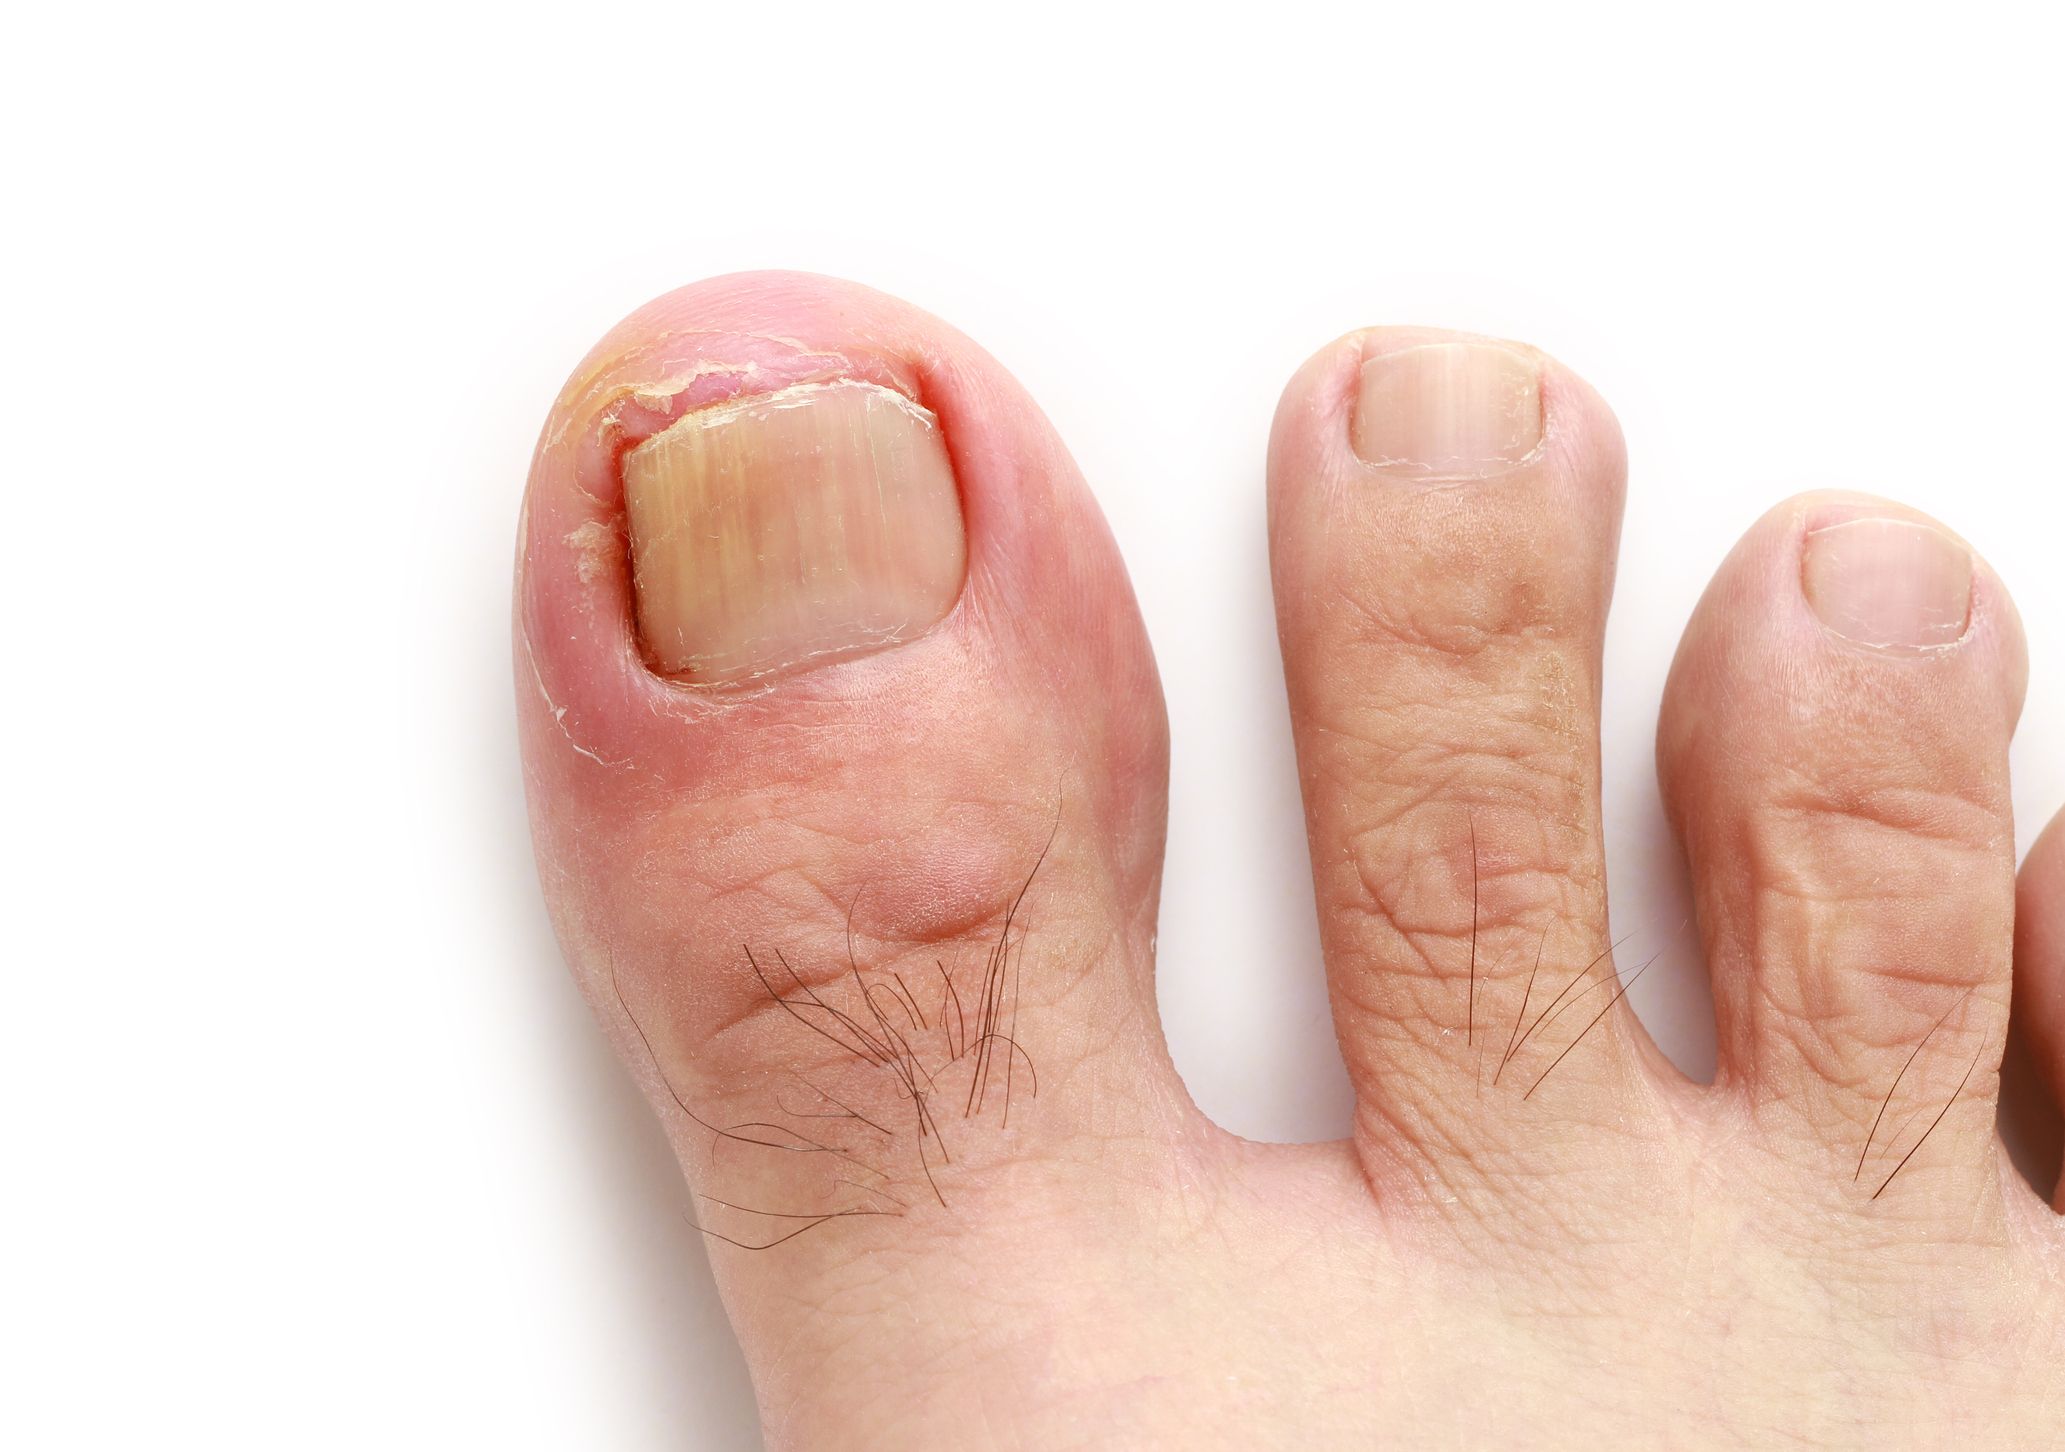 What's Causing The Black Spot Beneath My Nail? – My FootDr